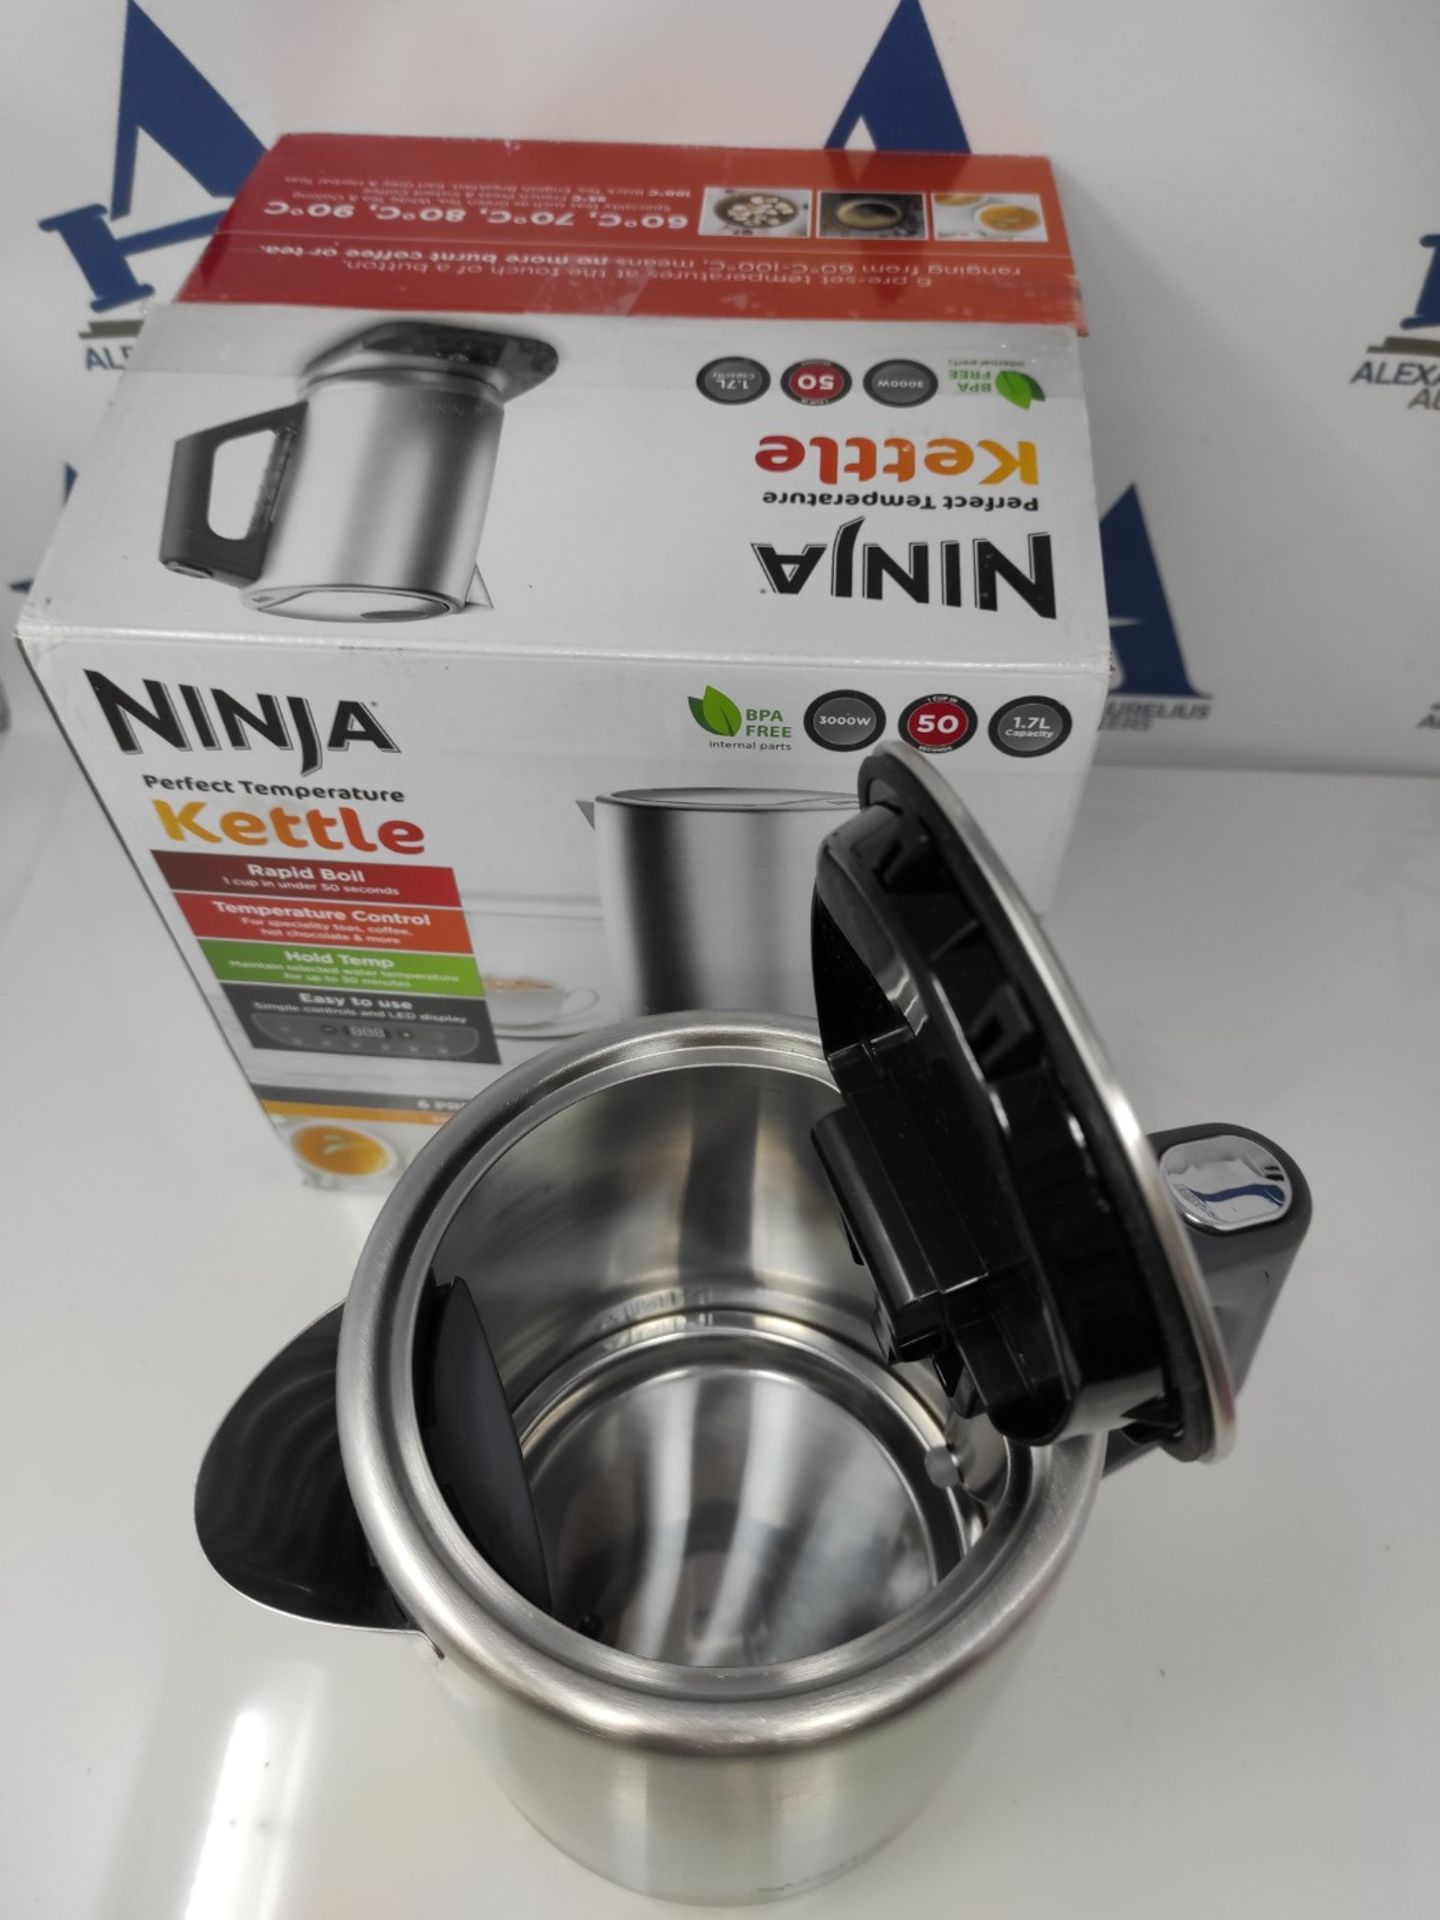 RRP £76.00 [INCOMPLETE] Ninja Perfect Temperature Kettle, 1.7L, with Temperature Control, LED Dis - Image 3 of 3